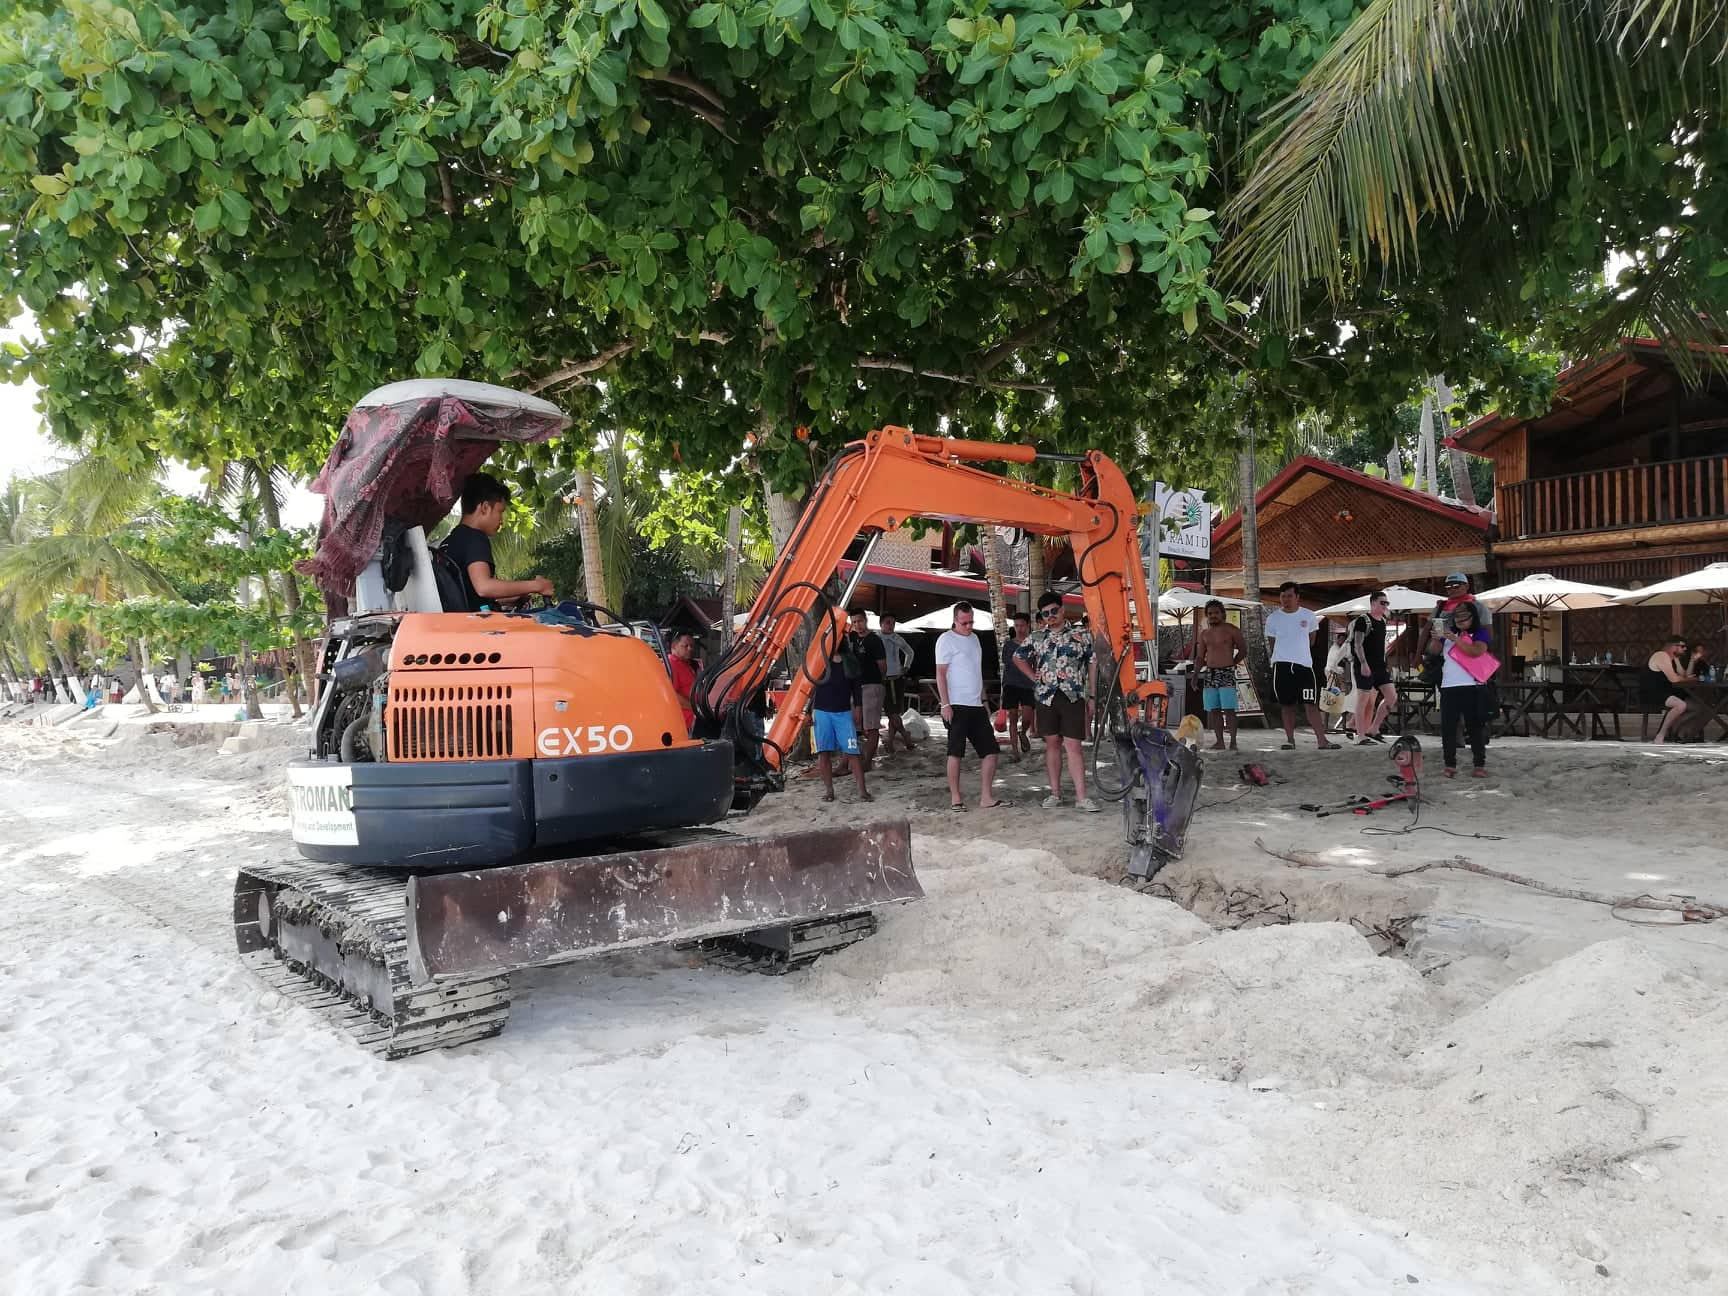 Resort owners tear down illegal structures along Alona Beach in Panglao